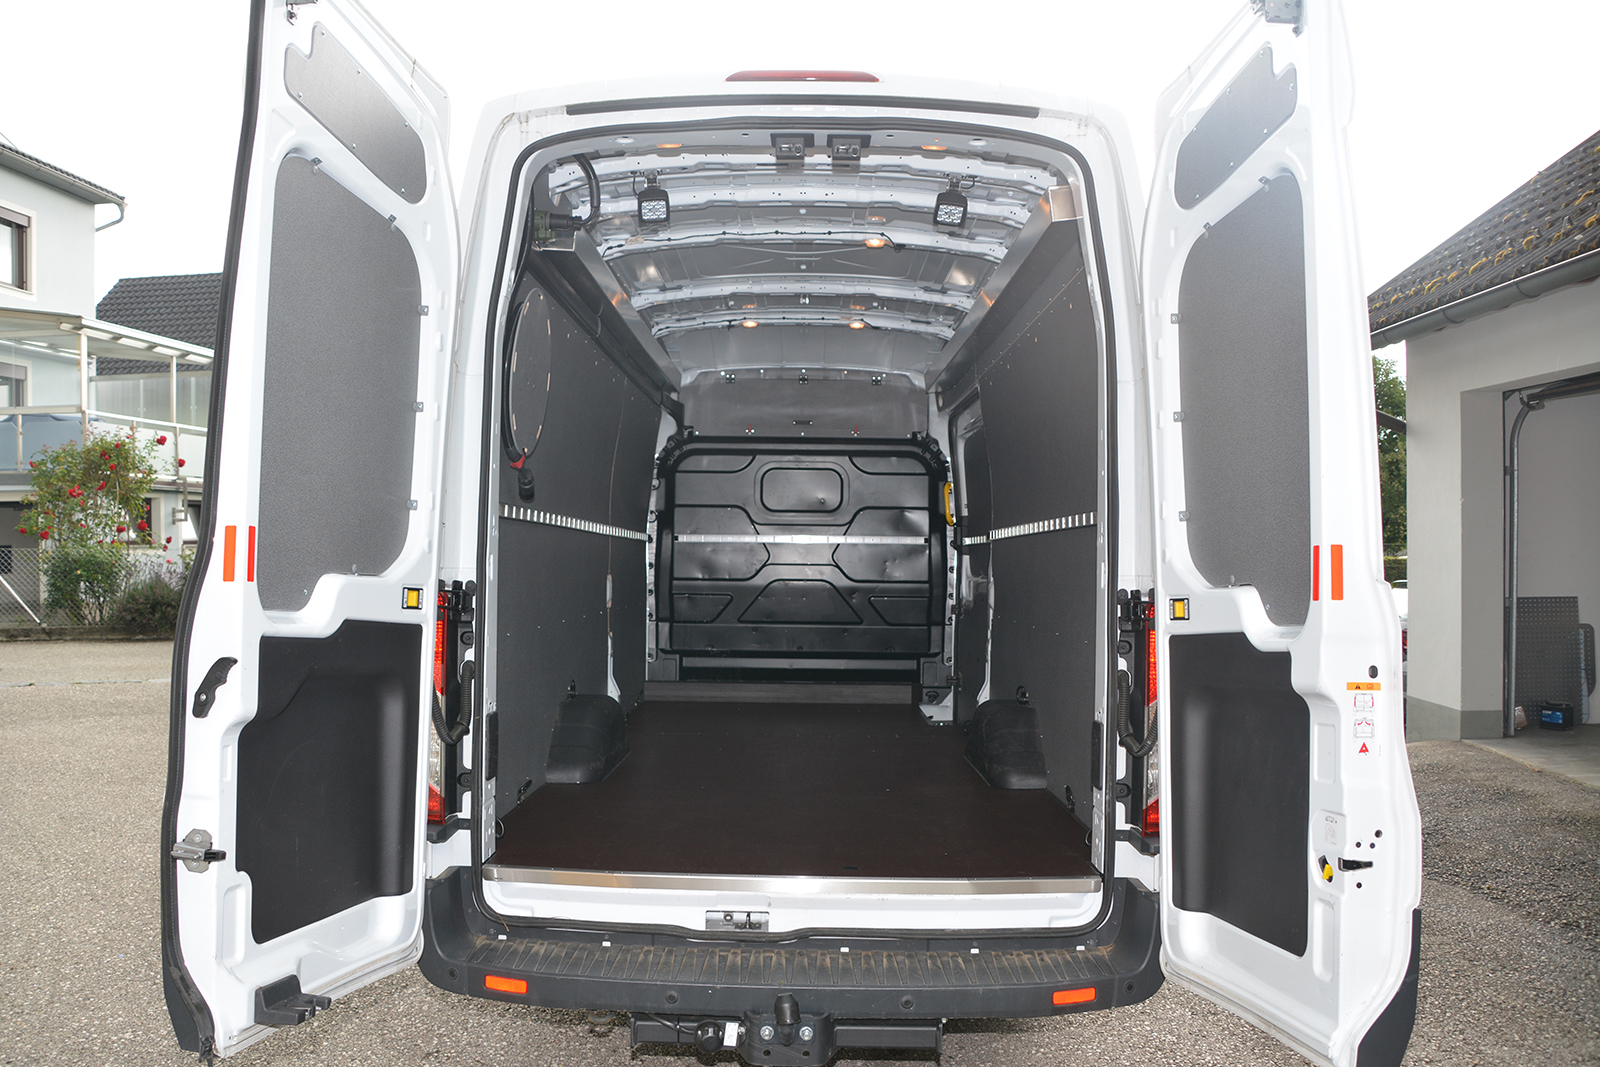 haselberger_iveco_daily_08